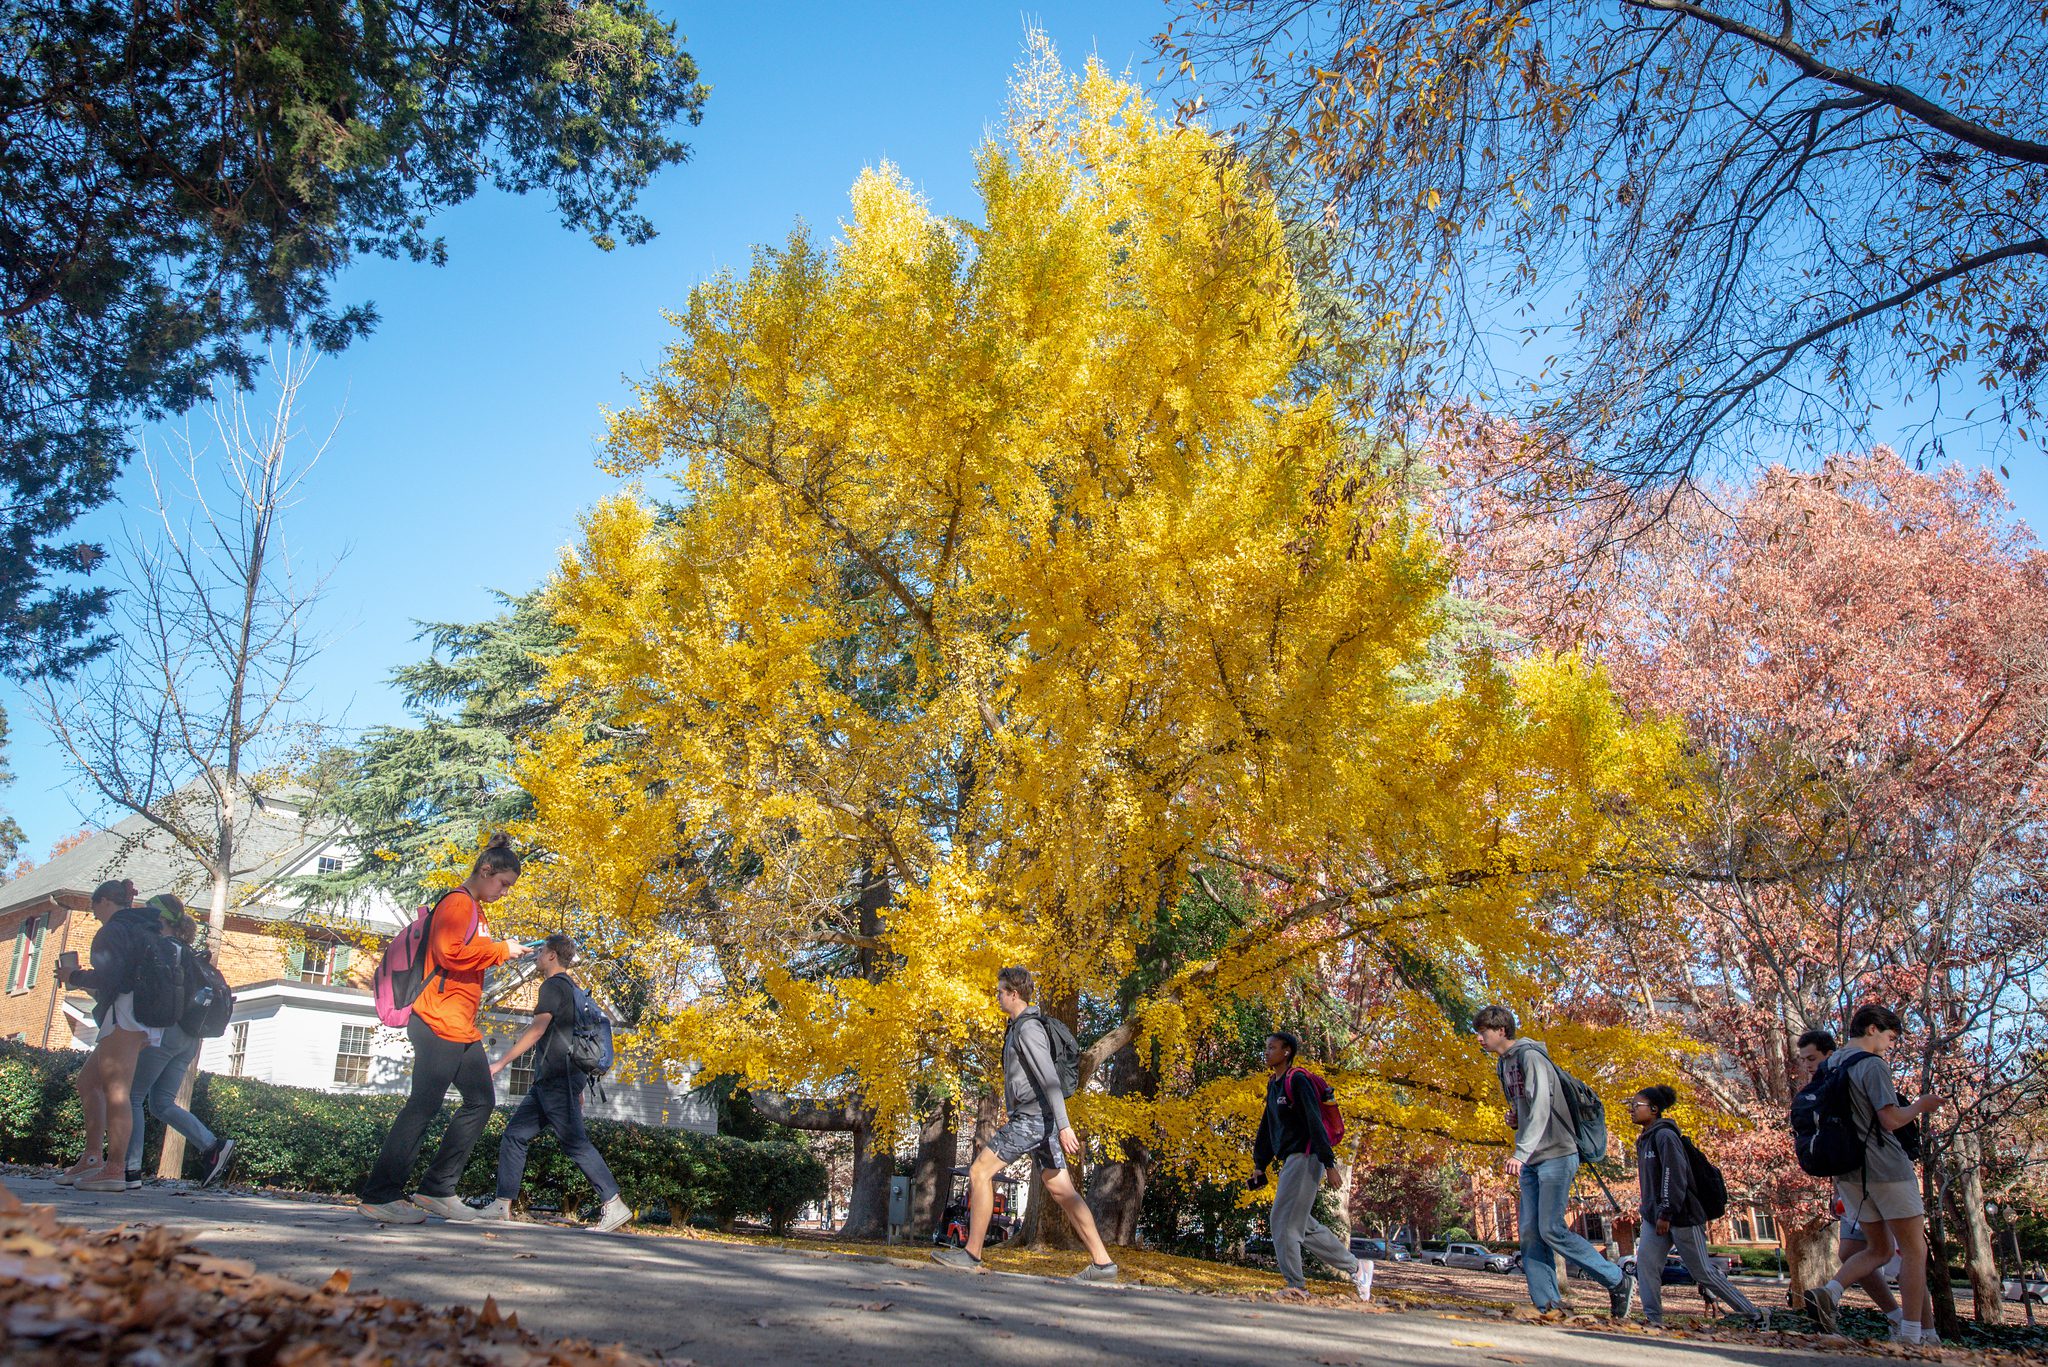 Students walk to class past a gingko tree exploding with bright leaves on a fall day, Nov. 28, 2022. (Photo by Ken Scar)